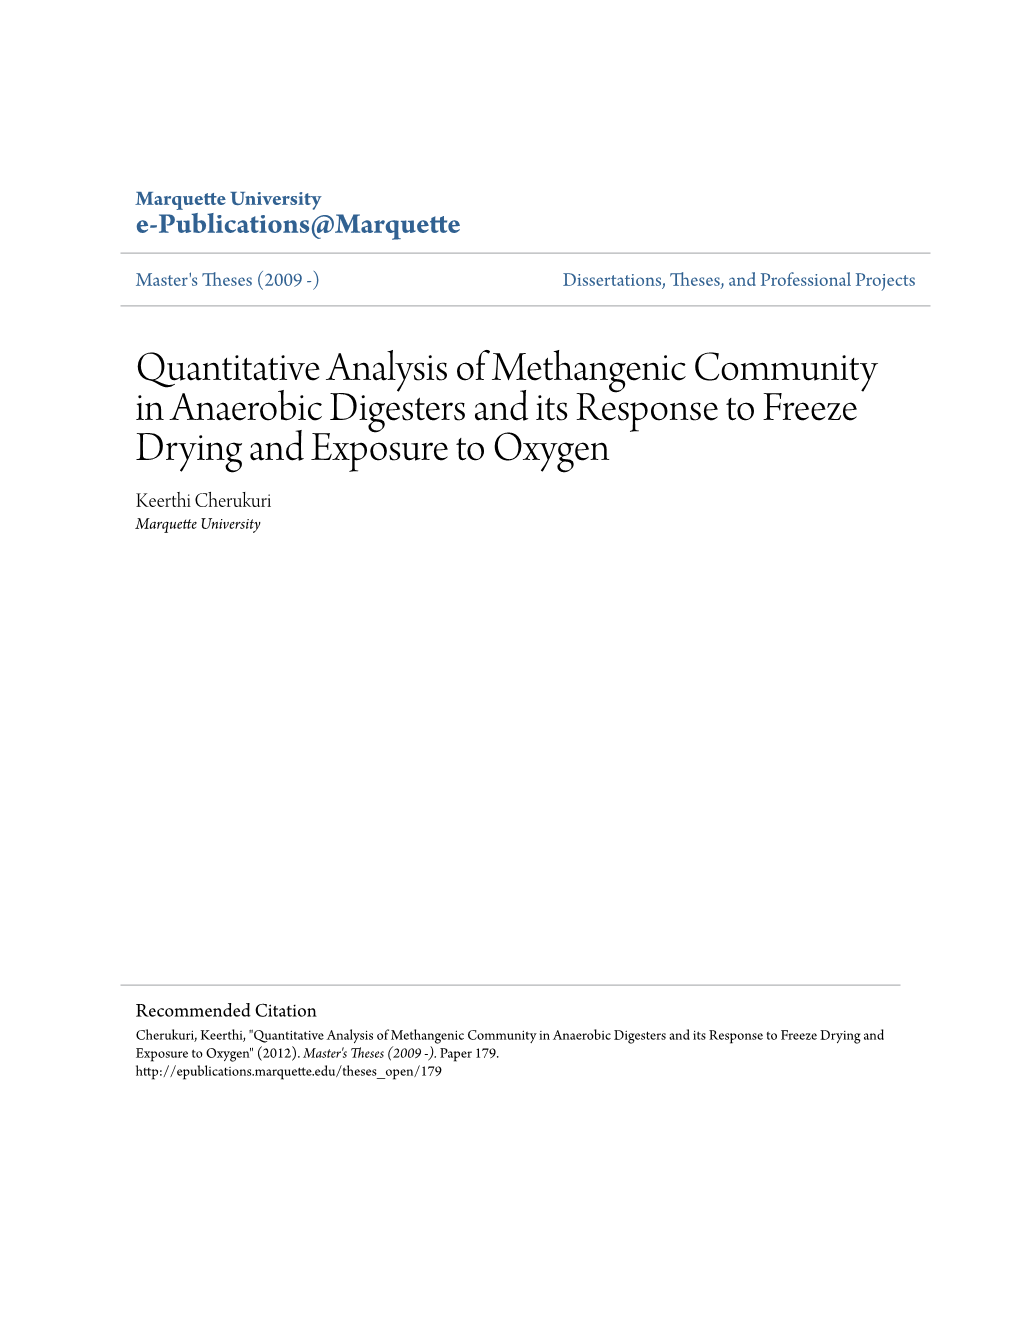 Quantitative Analysis of Methanogenic Community in Anaerobic Digesters and Its Response to Freeze Drying and Exposure to Oxygen